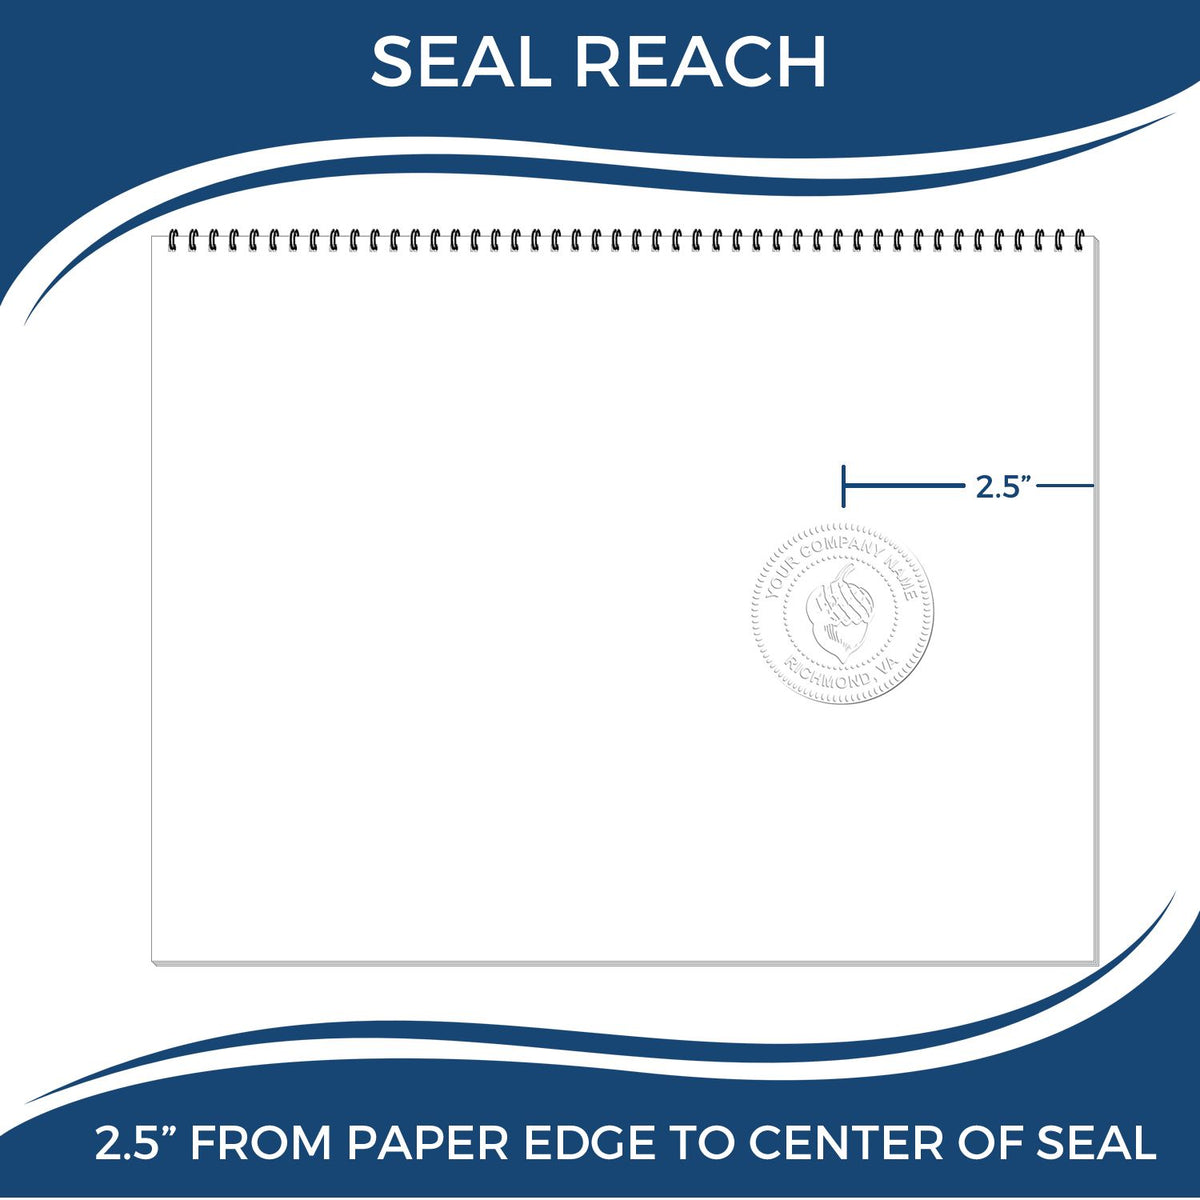 An infographic showing the seal reach which is represented by a ruler and a miniature seal image of the Long Reach New Mexico PE Seal